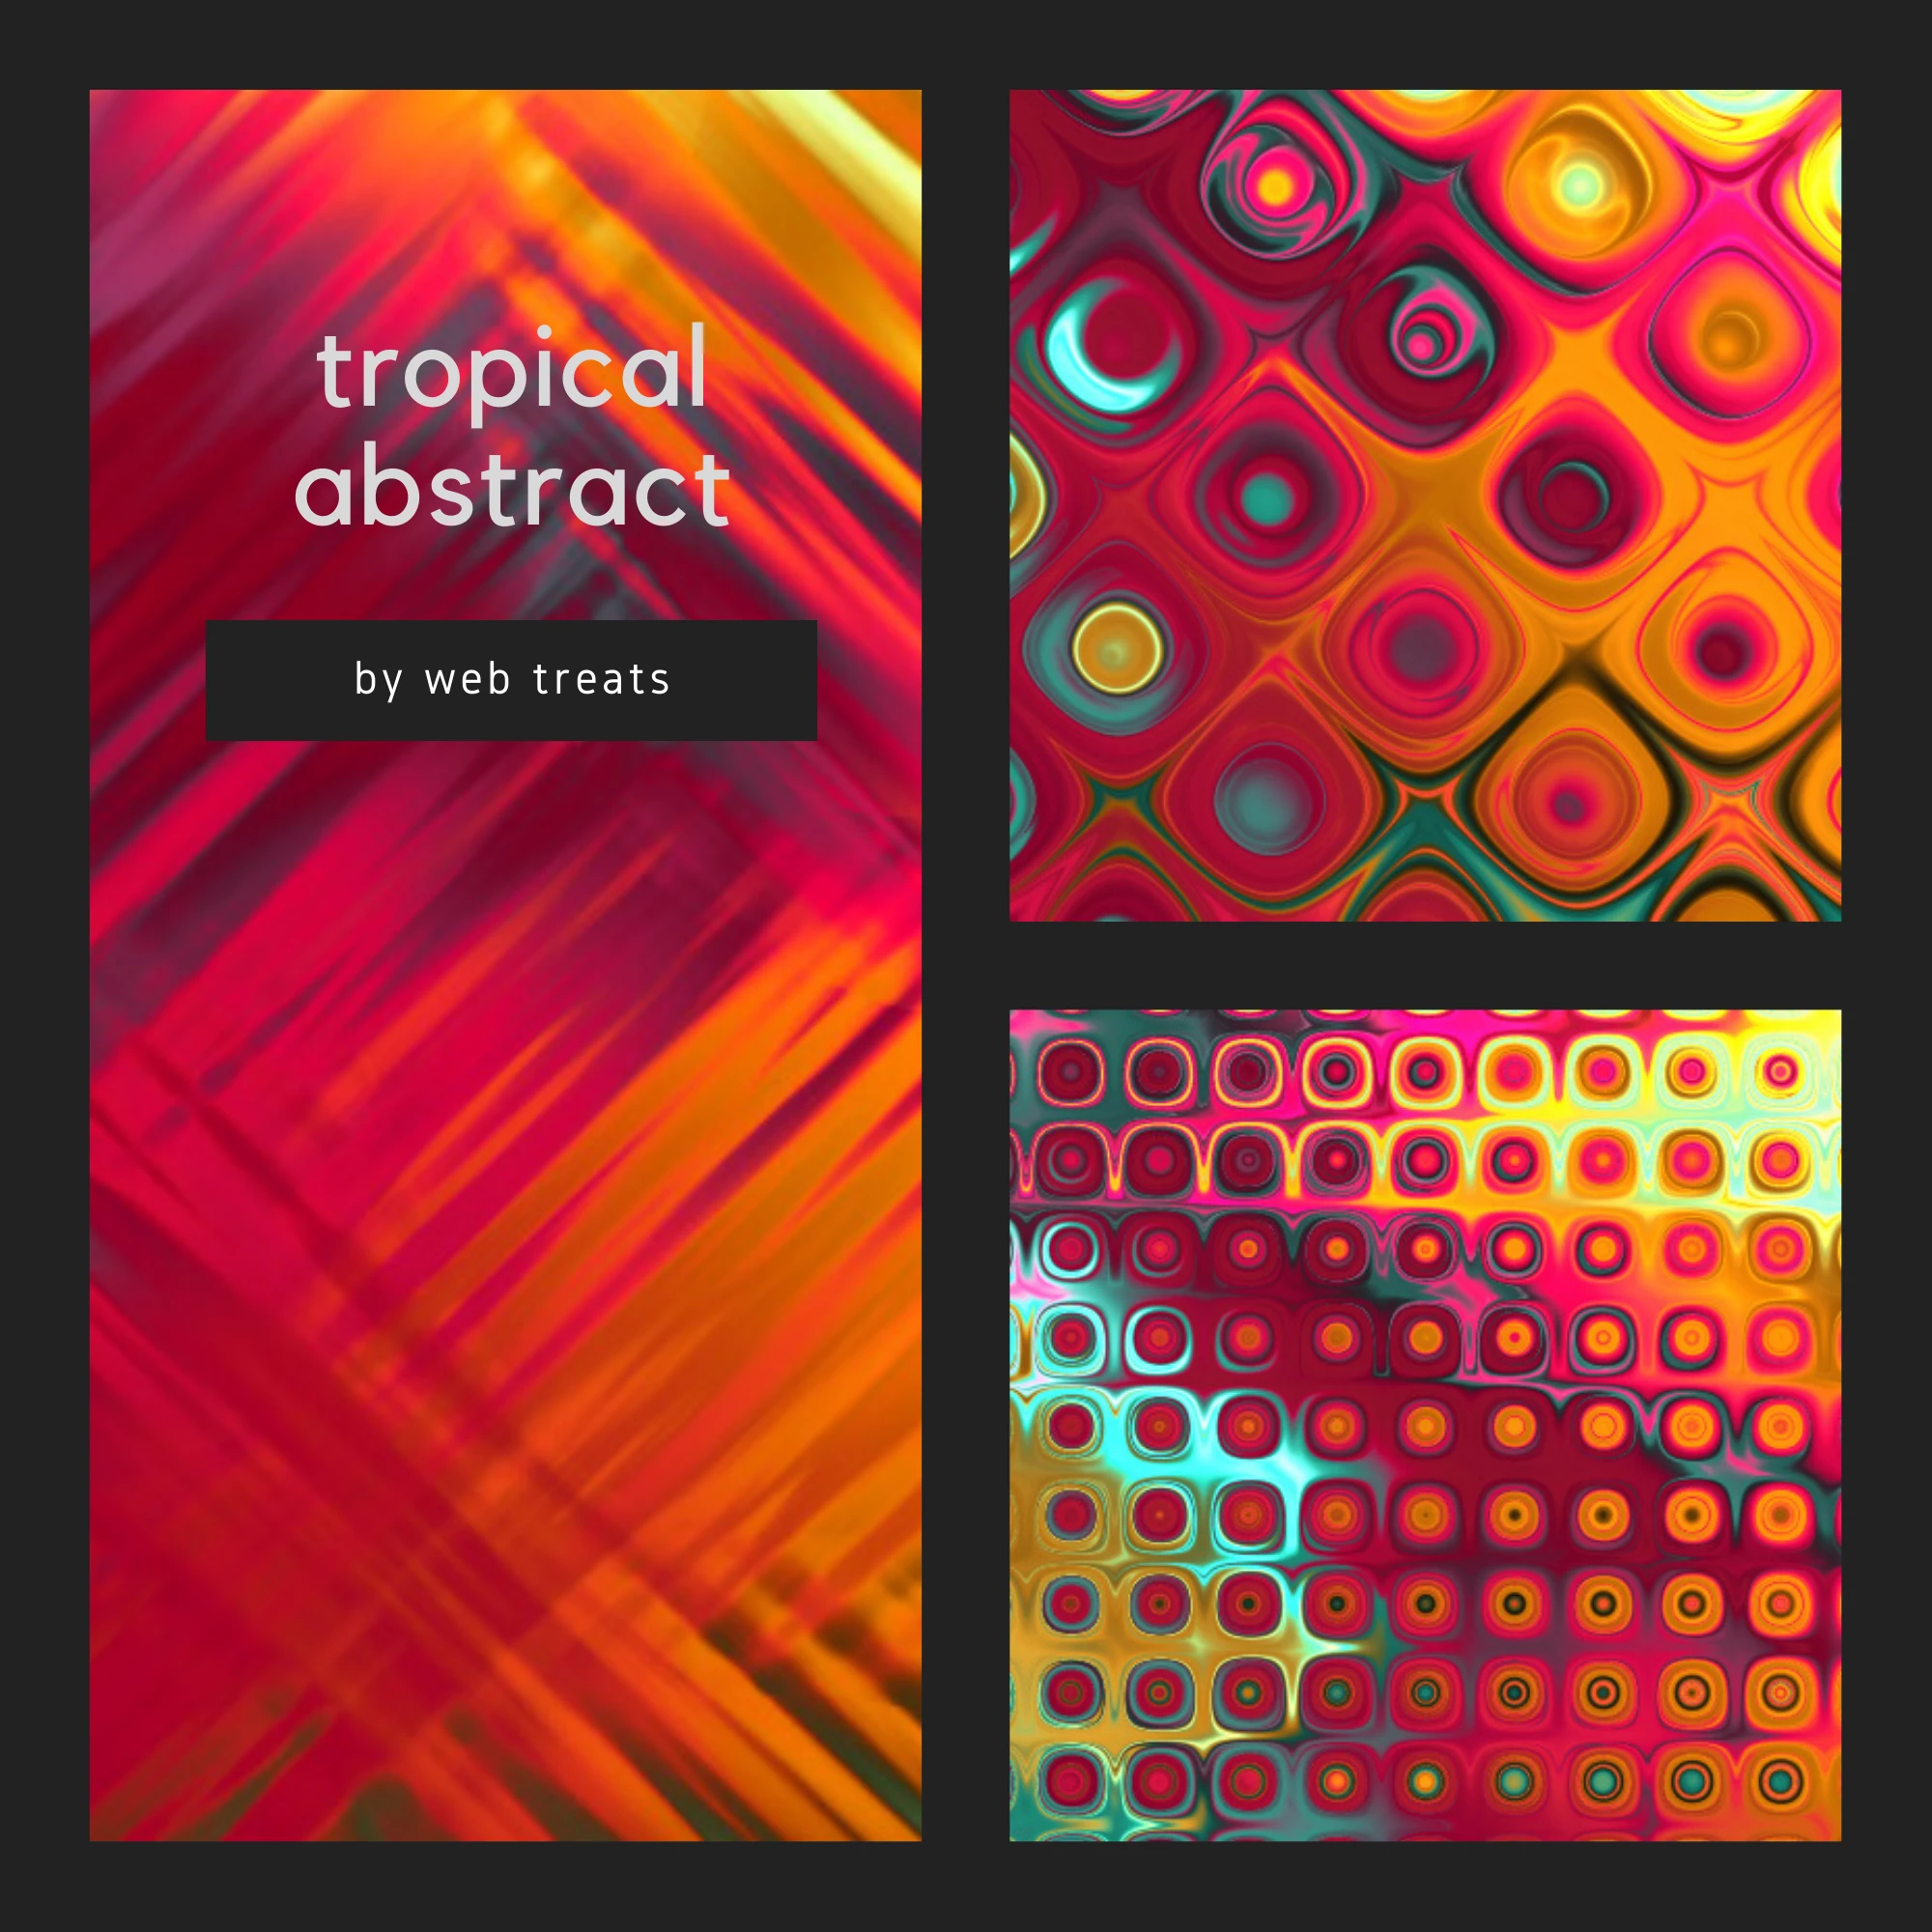 abstract tropical textures